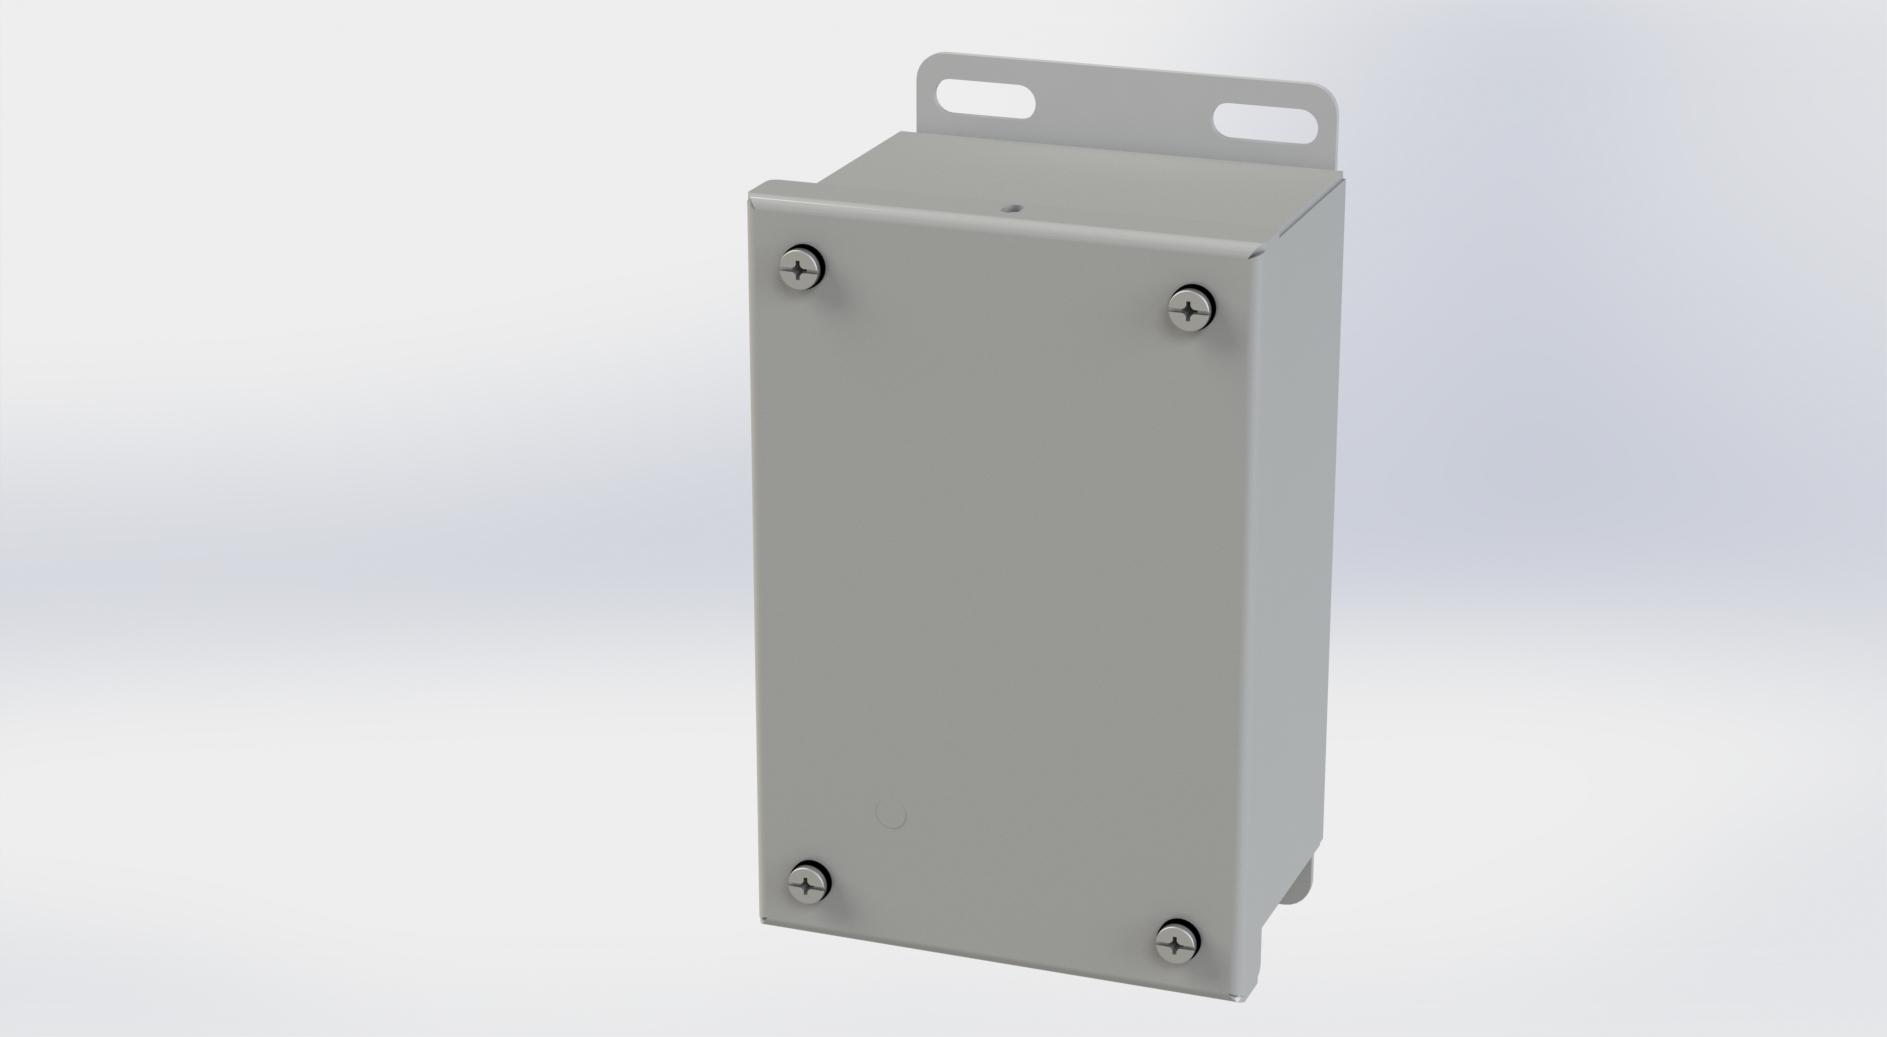 Saginaw Control SCE-604SC SC Enclosure, Height:6.13", Width:4.00", Depth:3.00", ANSI-61 gray powder coating inside and out.  Optional sub-panels are powder coated white.